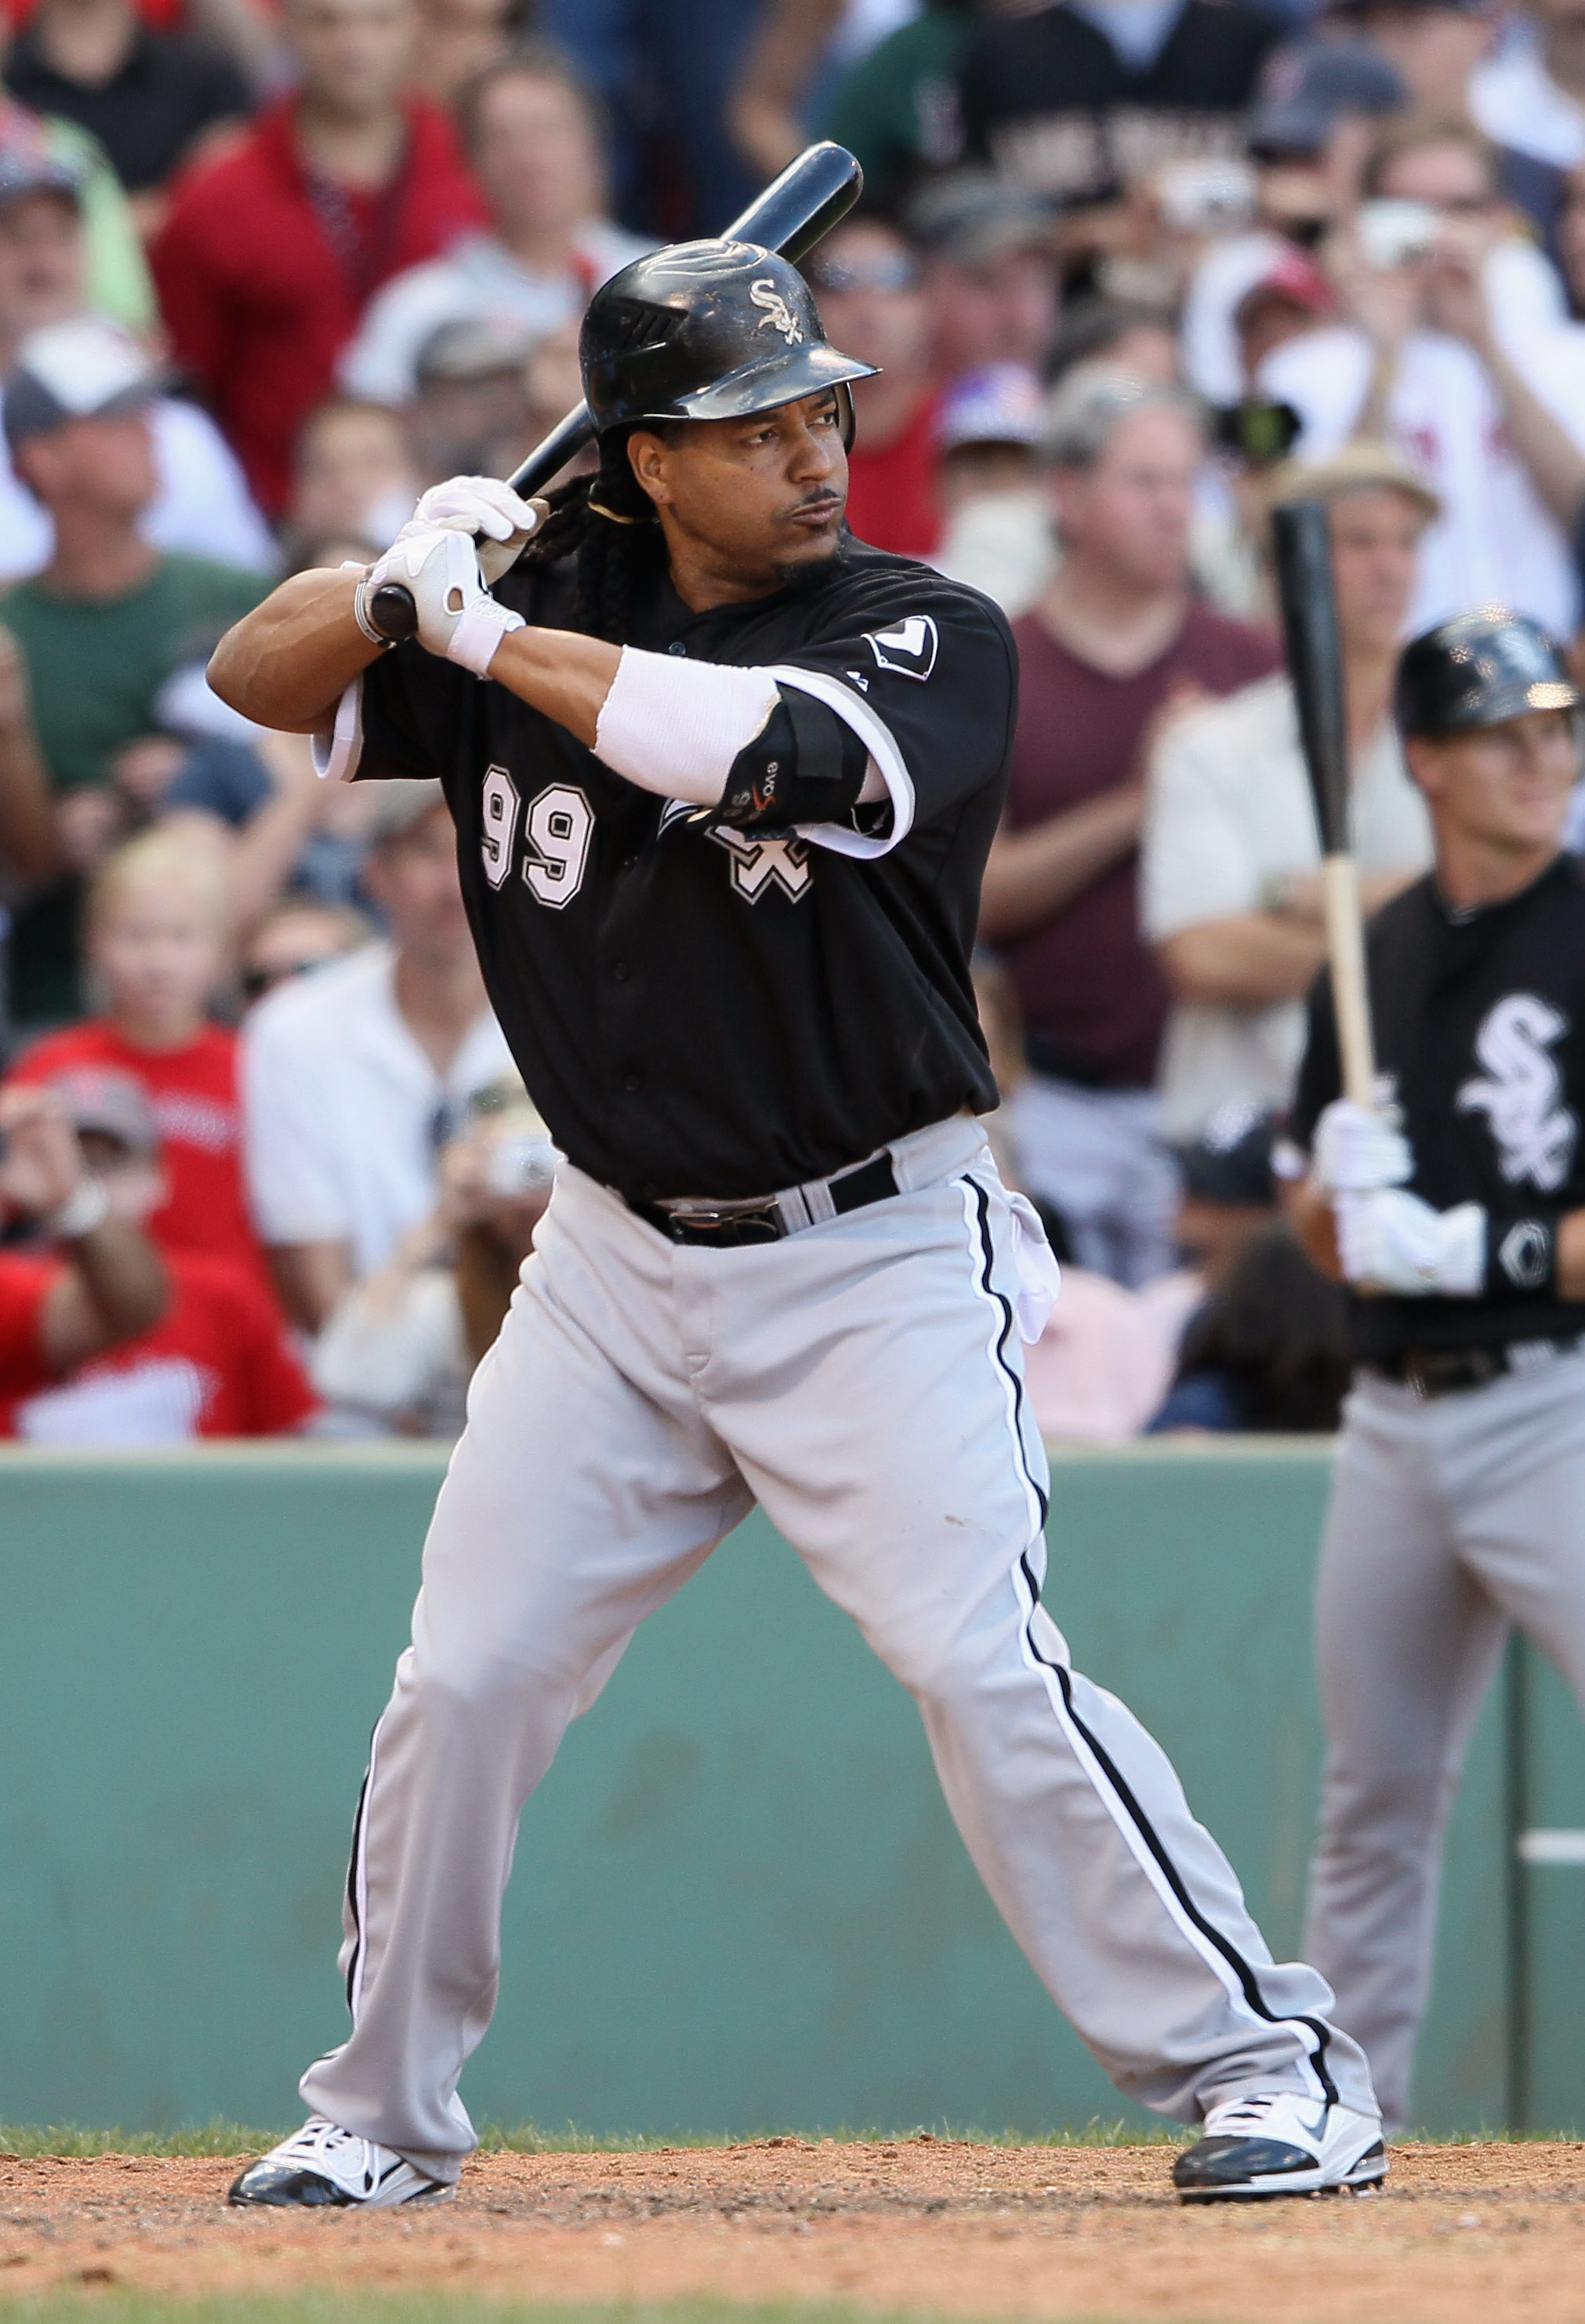 BOSTON - SEPTEMBER 05:  Manny Ramirez #99 of the Chicago White Sox pinch hits in the eighth inning against the Boston Red Sox on September 5, 2010 at Fenway Park in Boston, Massachusetts.  (Photo by Elsa/Getty Images)